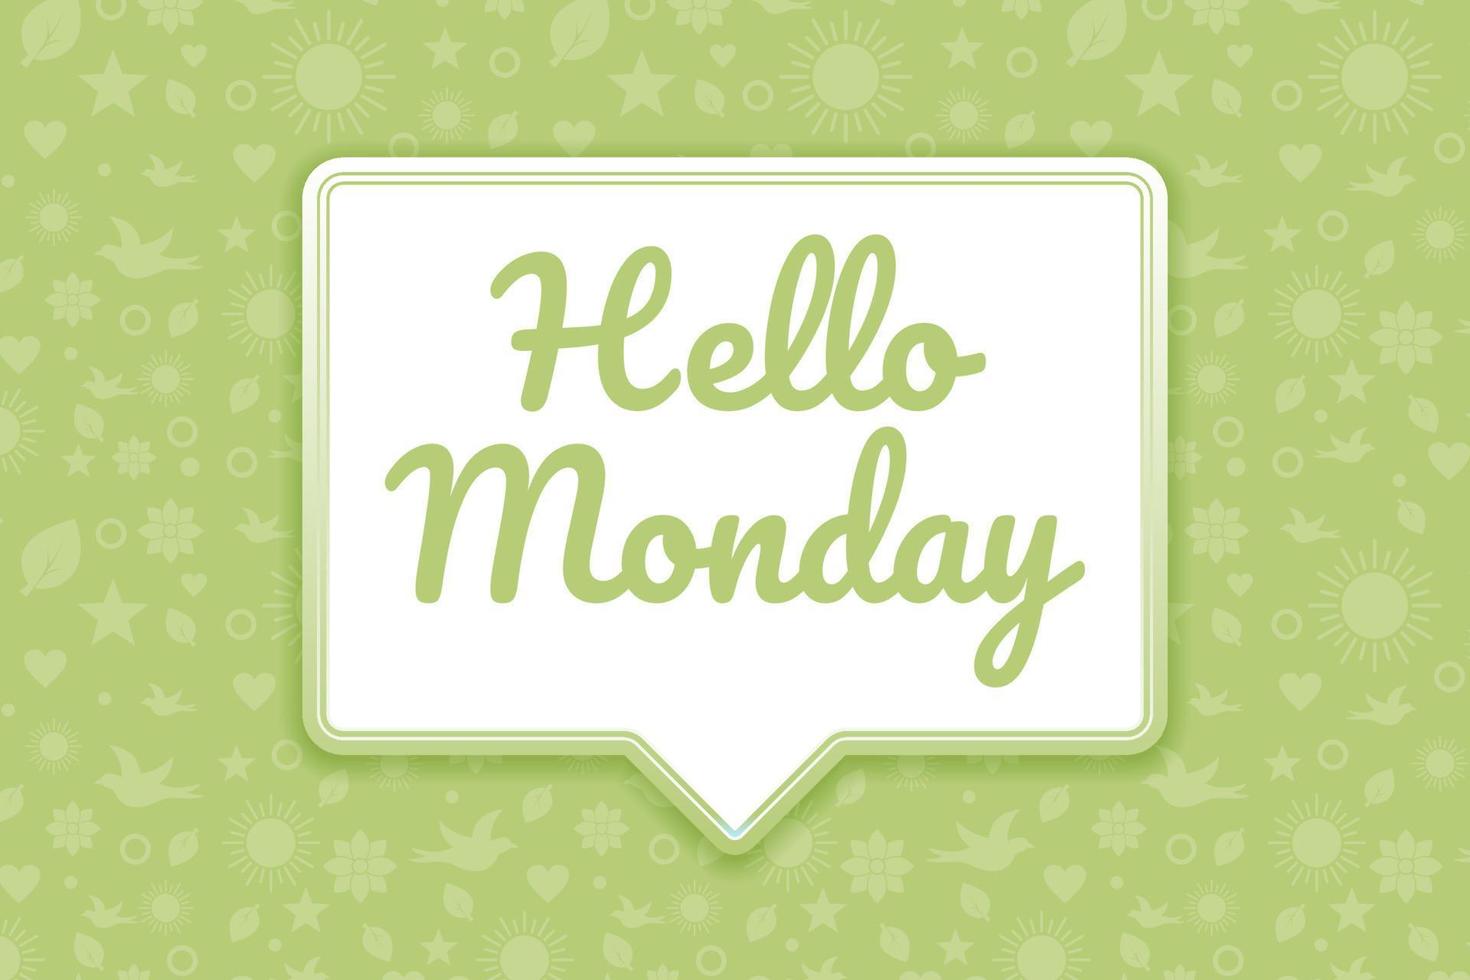 Hello Monday greeting flat style design, with chat bubble and pattern background vector